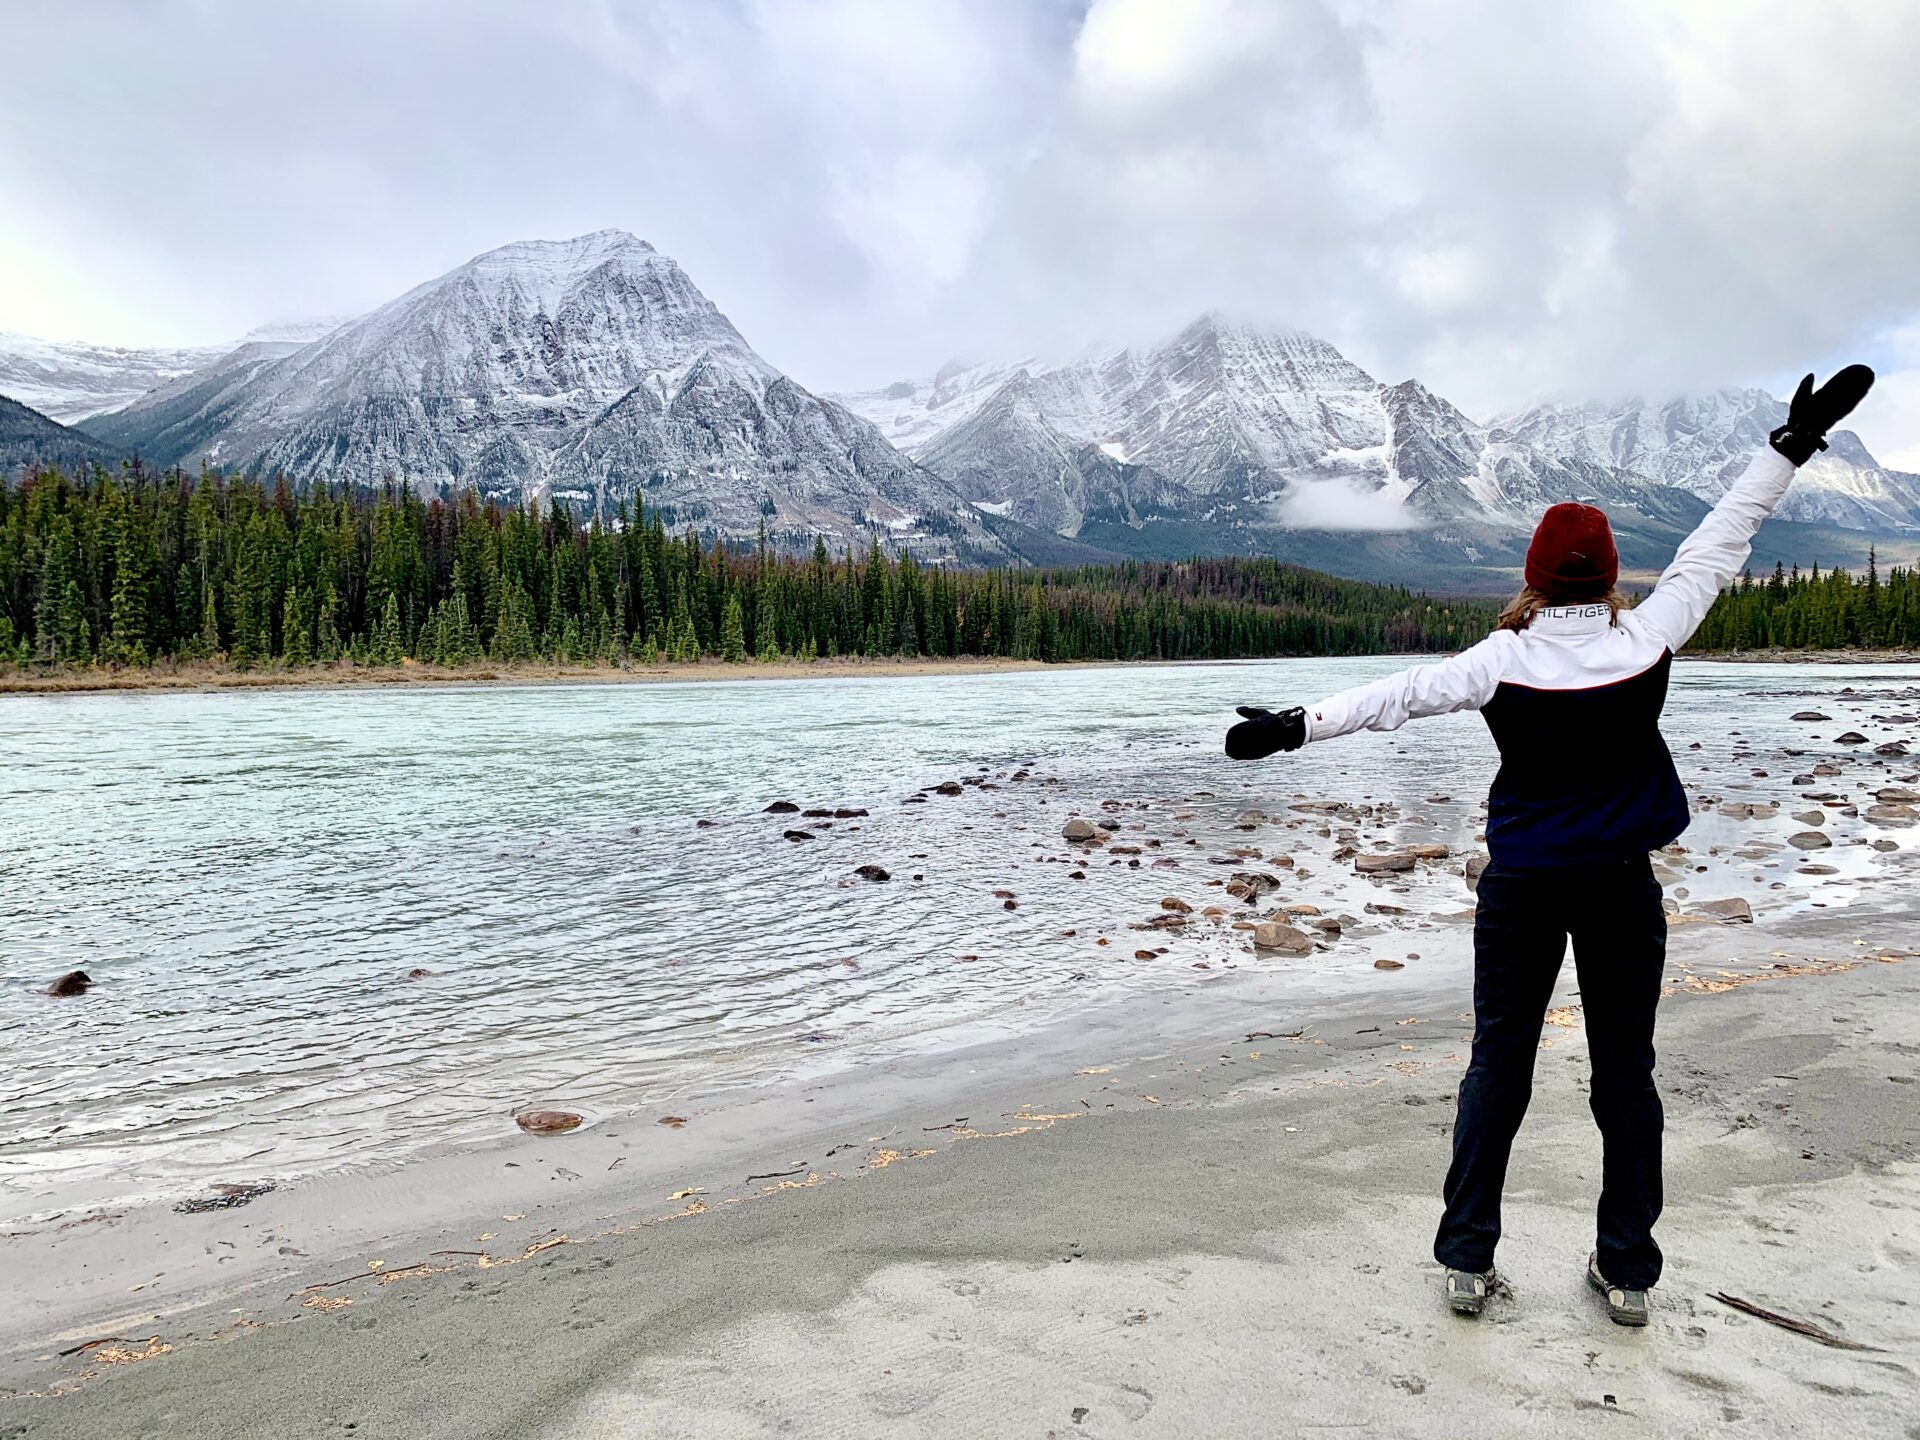 Icefields Parkway Popular Stops Along the Way, Attractions, Viewpoints